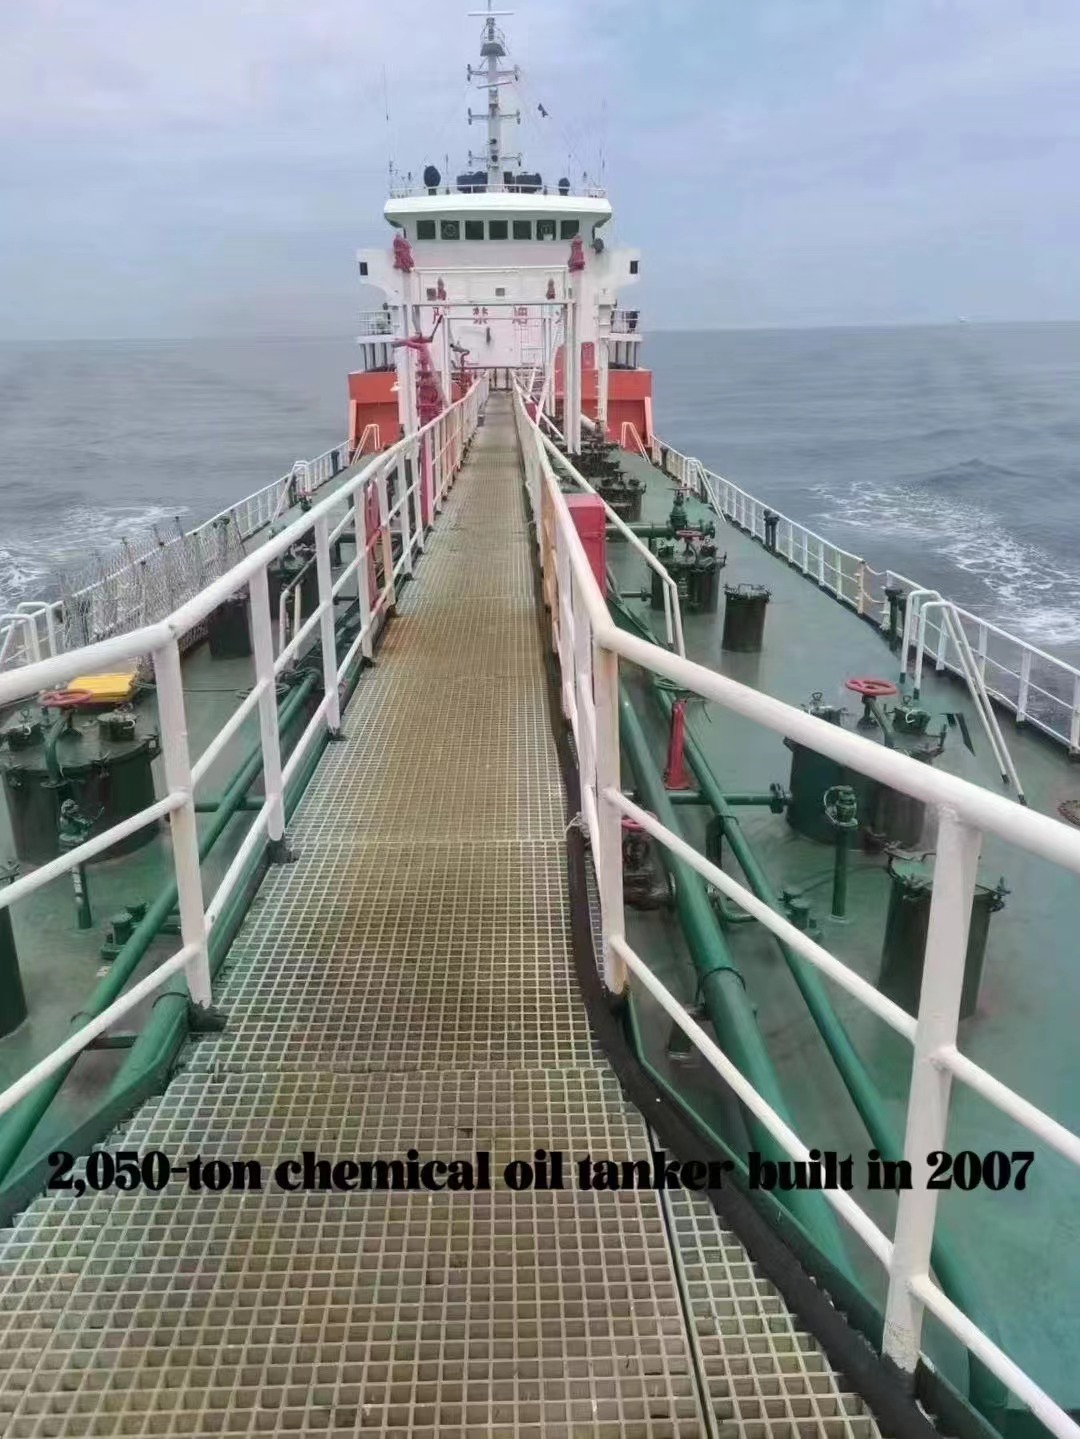 For sale: 2050 tons of chemical oil tanker, built in Zhejiang, China in 2007, suitable for foreign trade export.